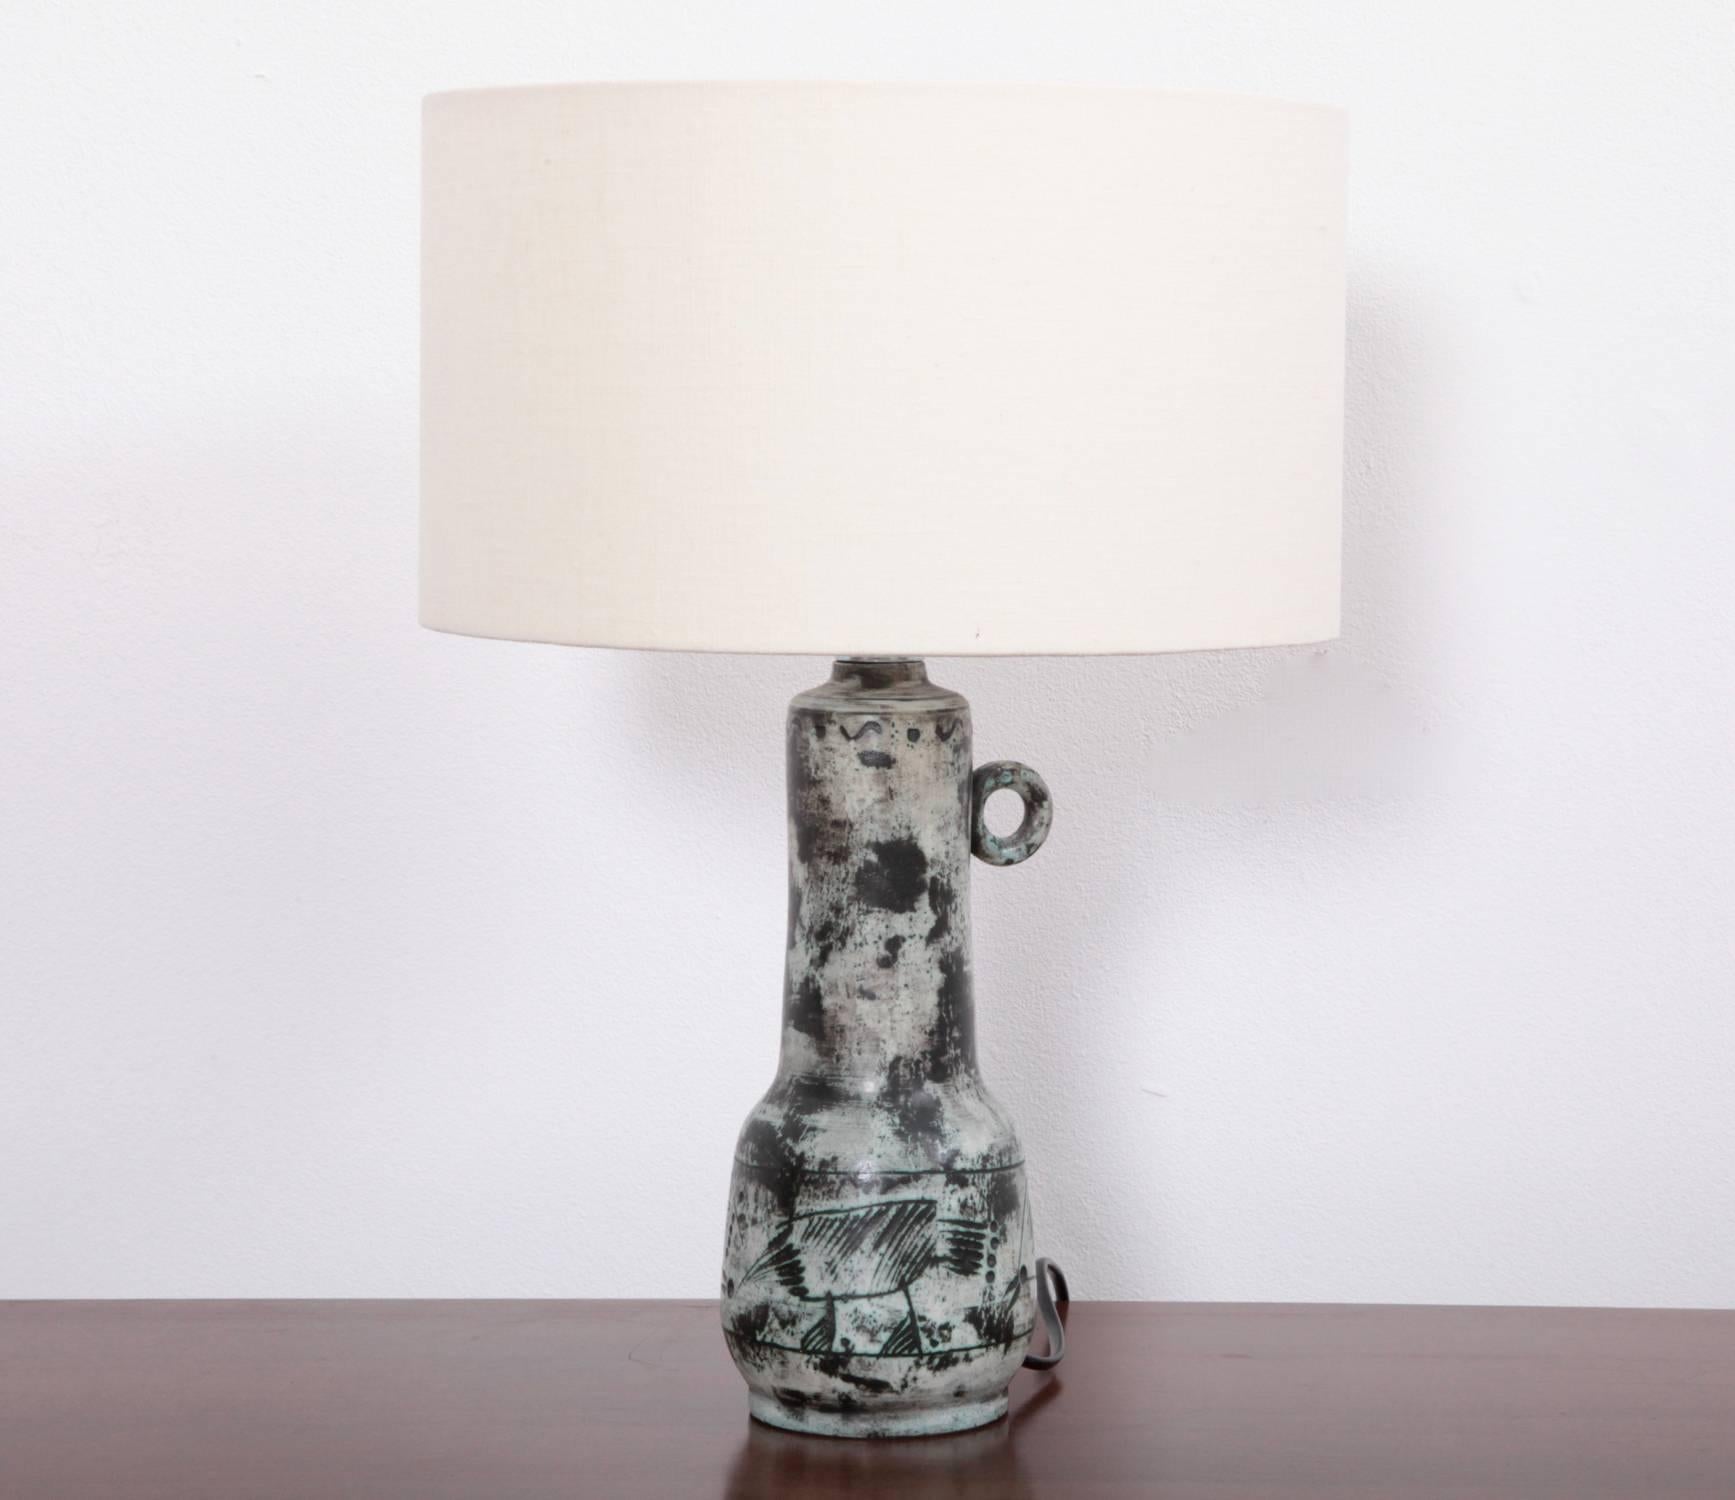 Jacques Blin table lamp with mottled glaze and decorative etchings. No chips! 1xE14 Bulb. Size is including shade. Base has a height of 25 cm / 9.8